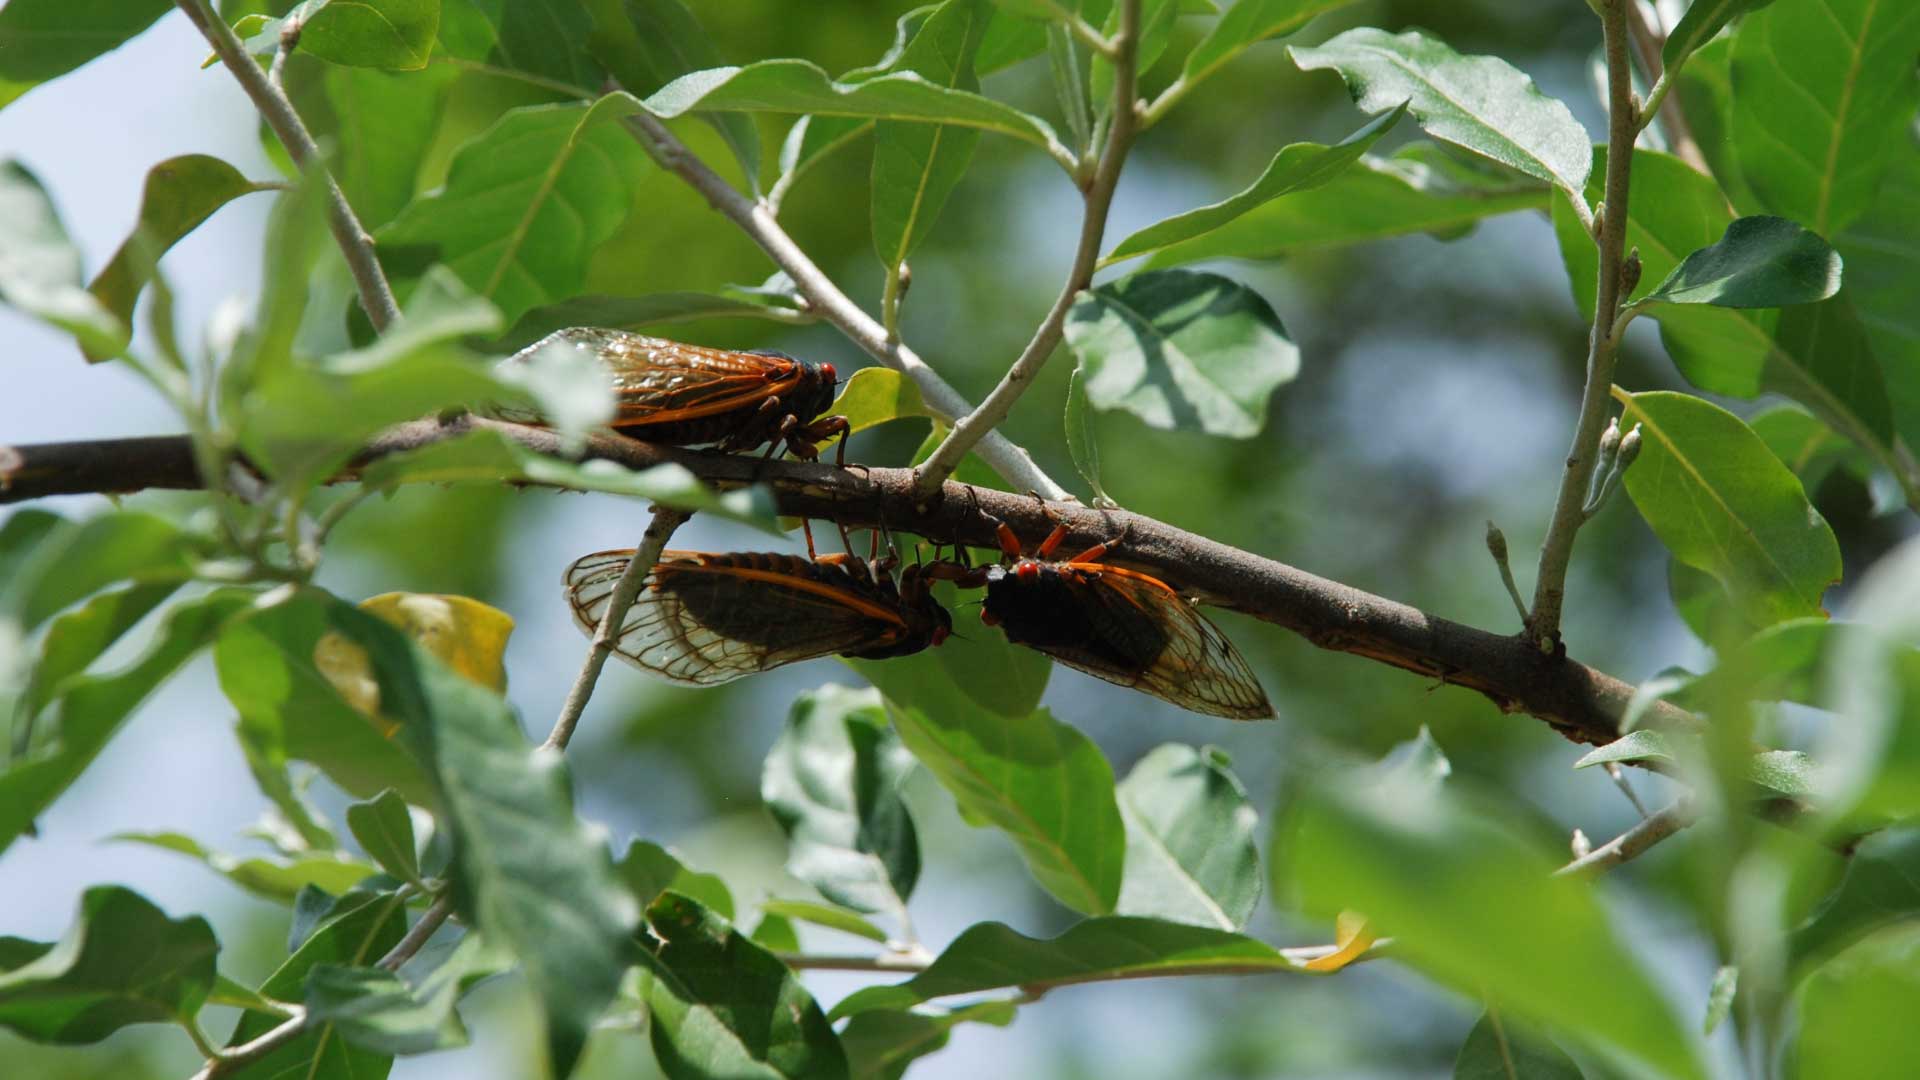 A bunch of periodical cicadas clinging to a branch.